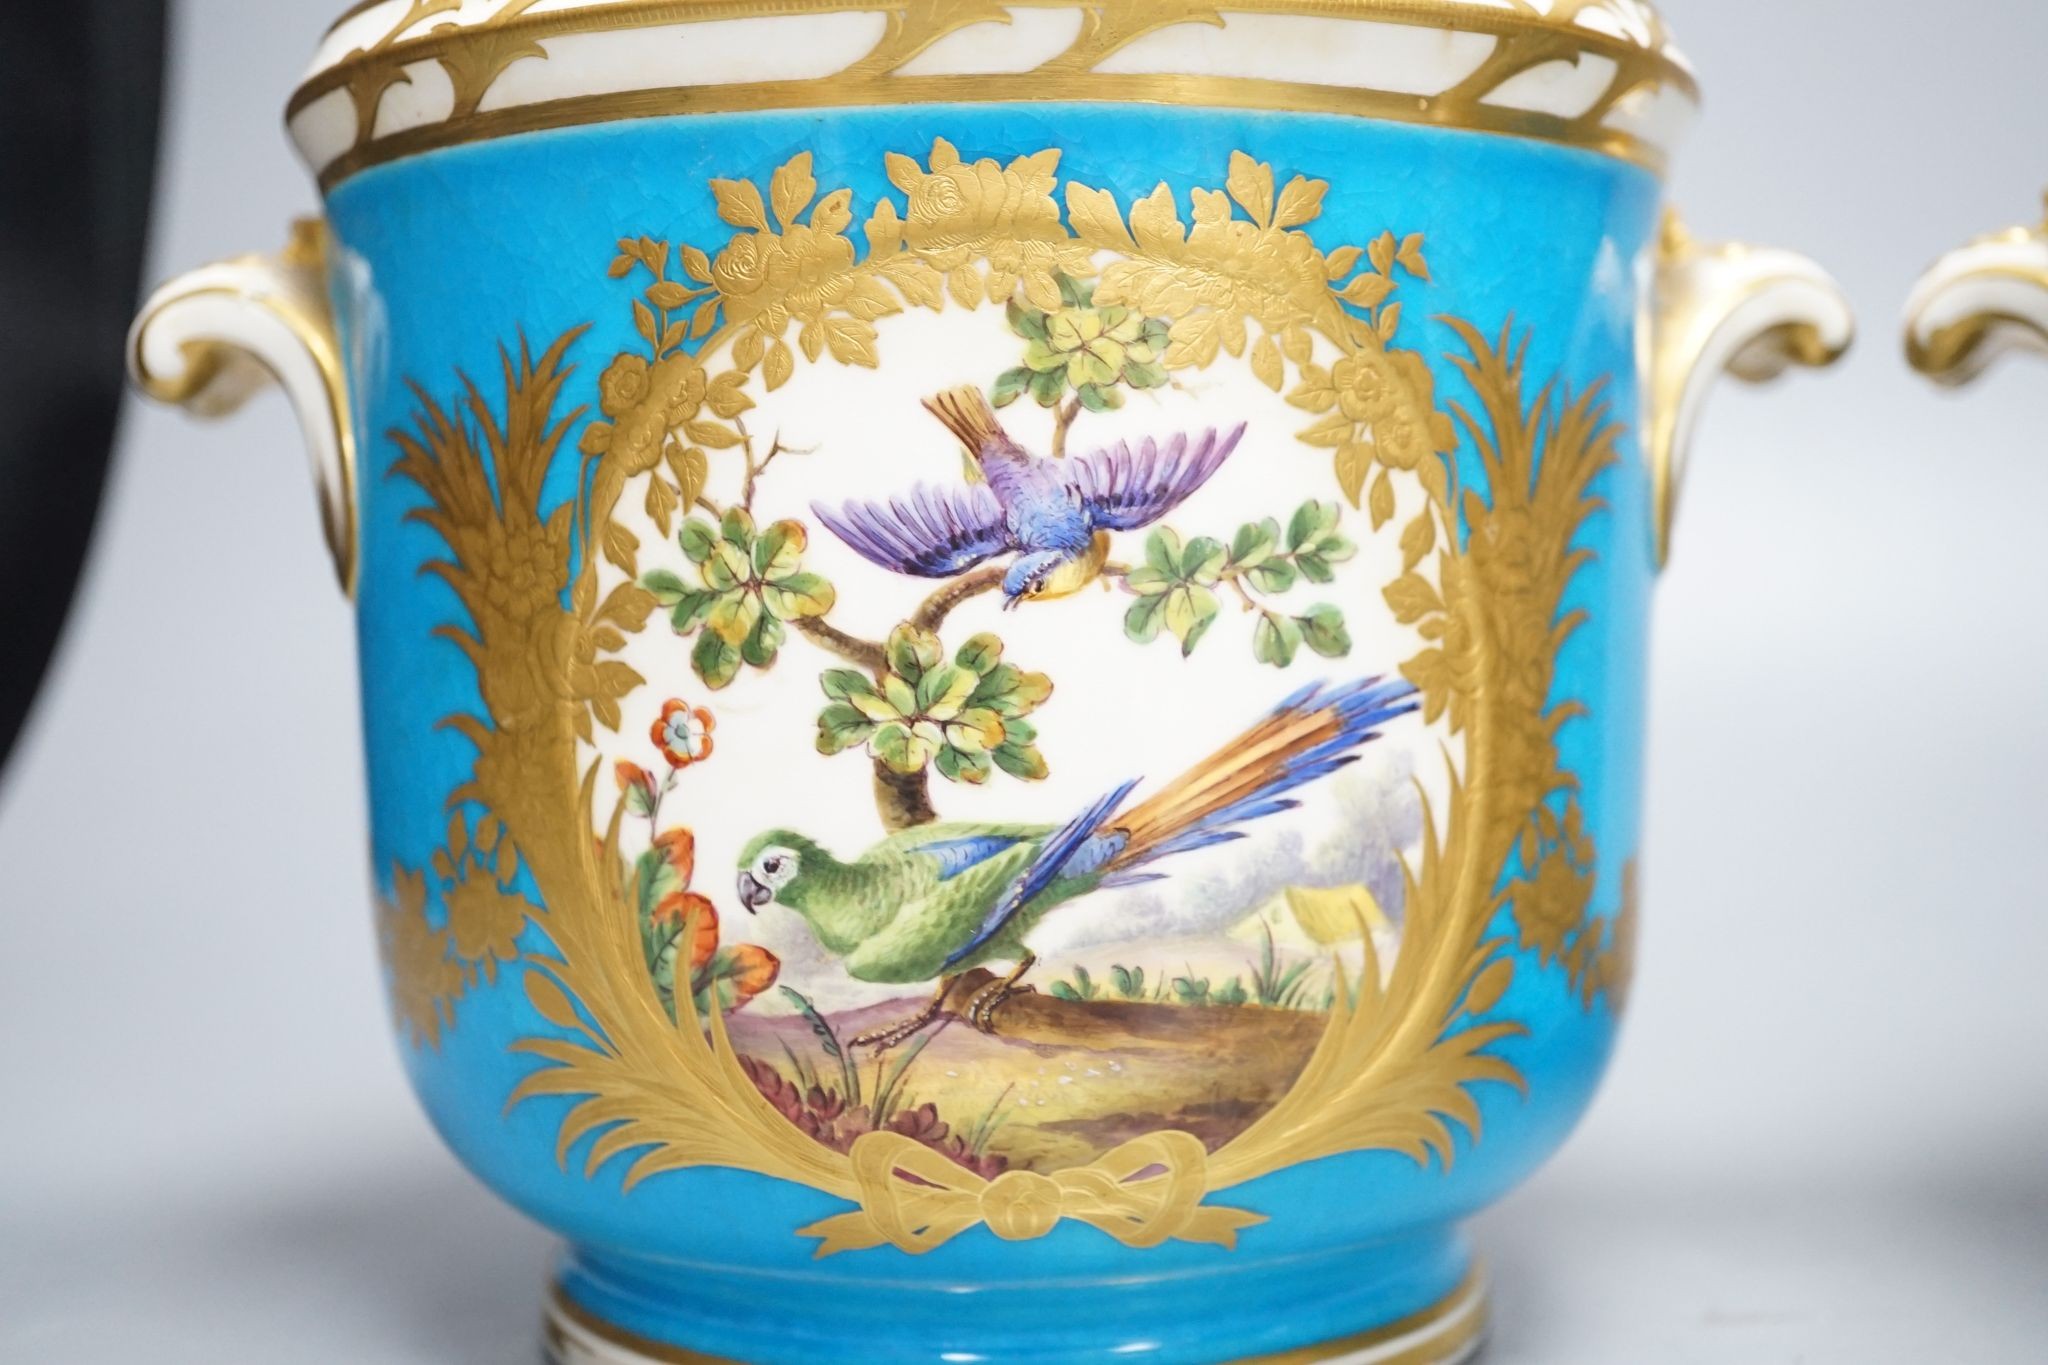 A pair of mid 19th century English porcelain cache pots, 14.5 cms high.